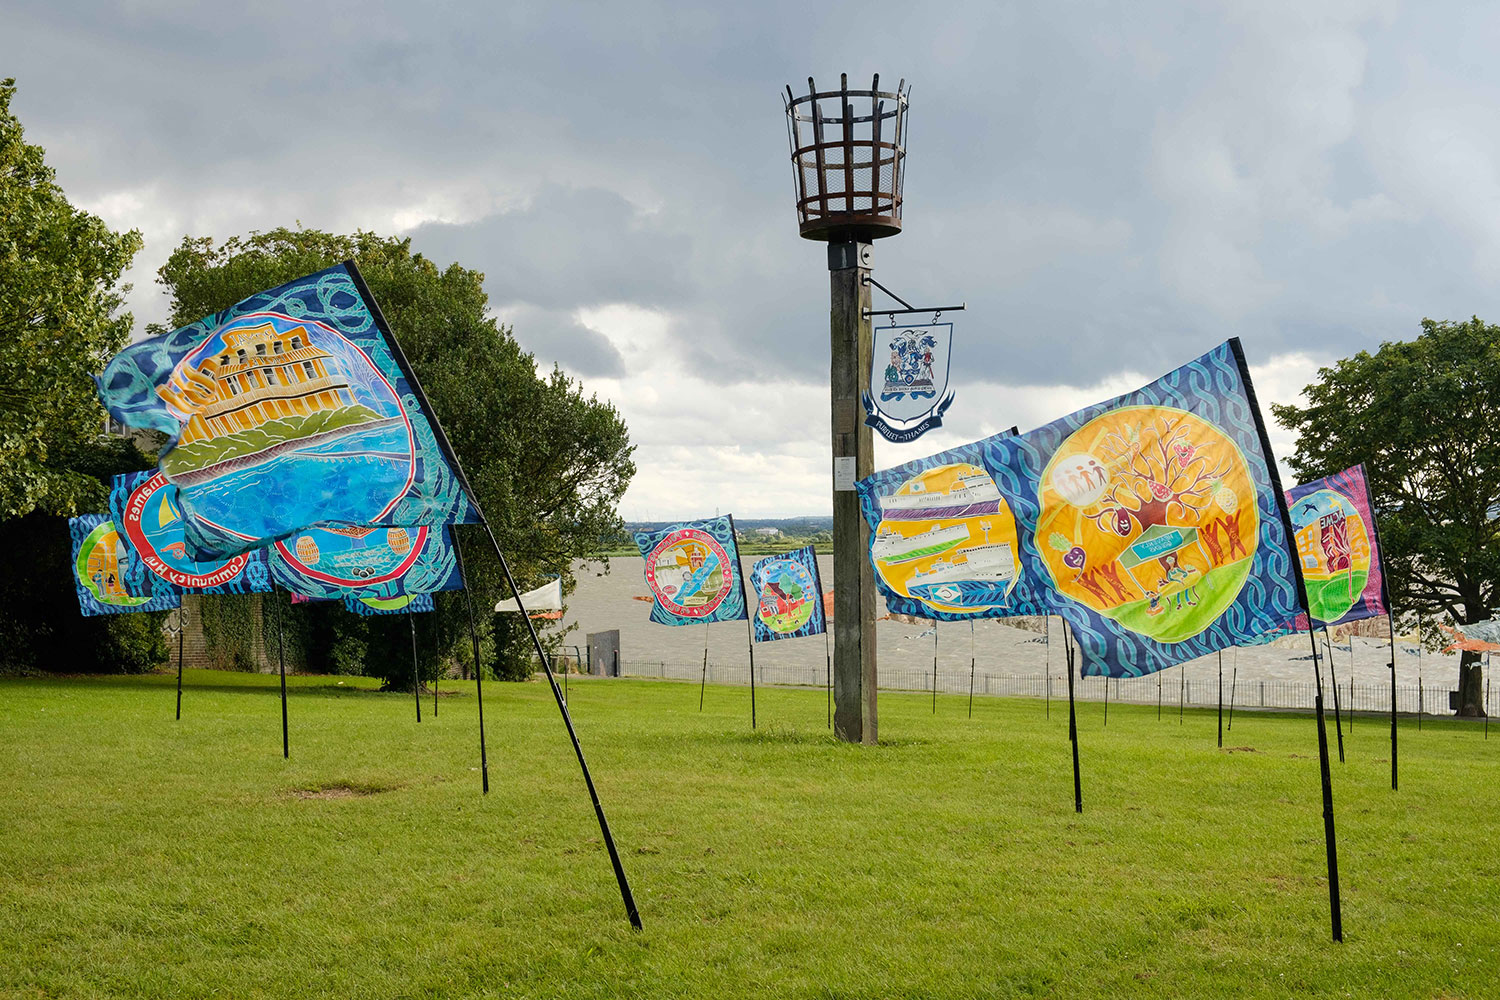 Flags illustrating aspects of the area decorate the grass in front of the Purfleet-on-Thames Beacon